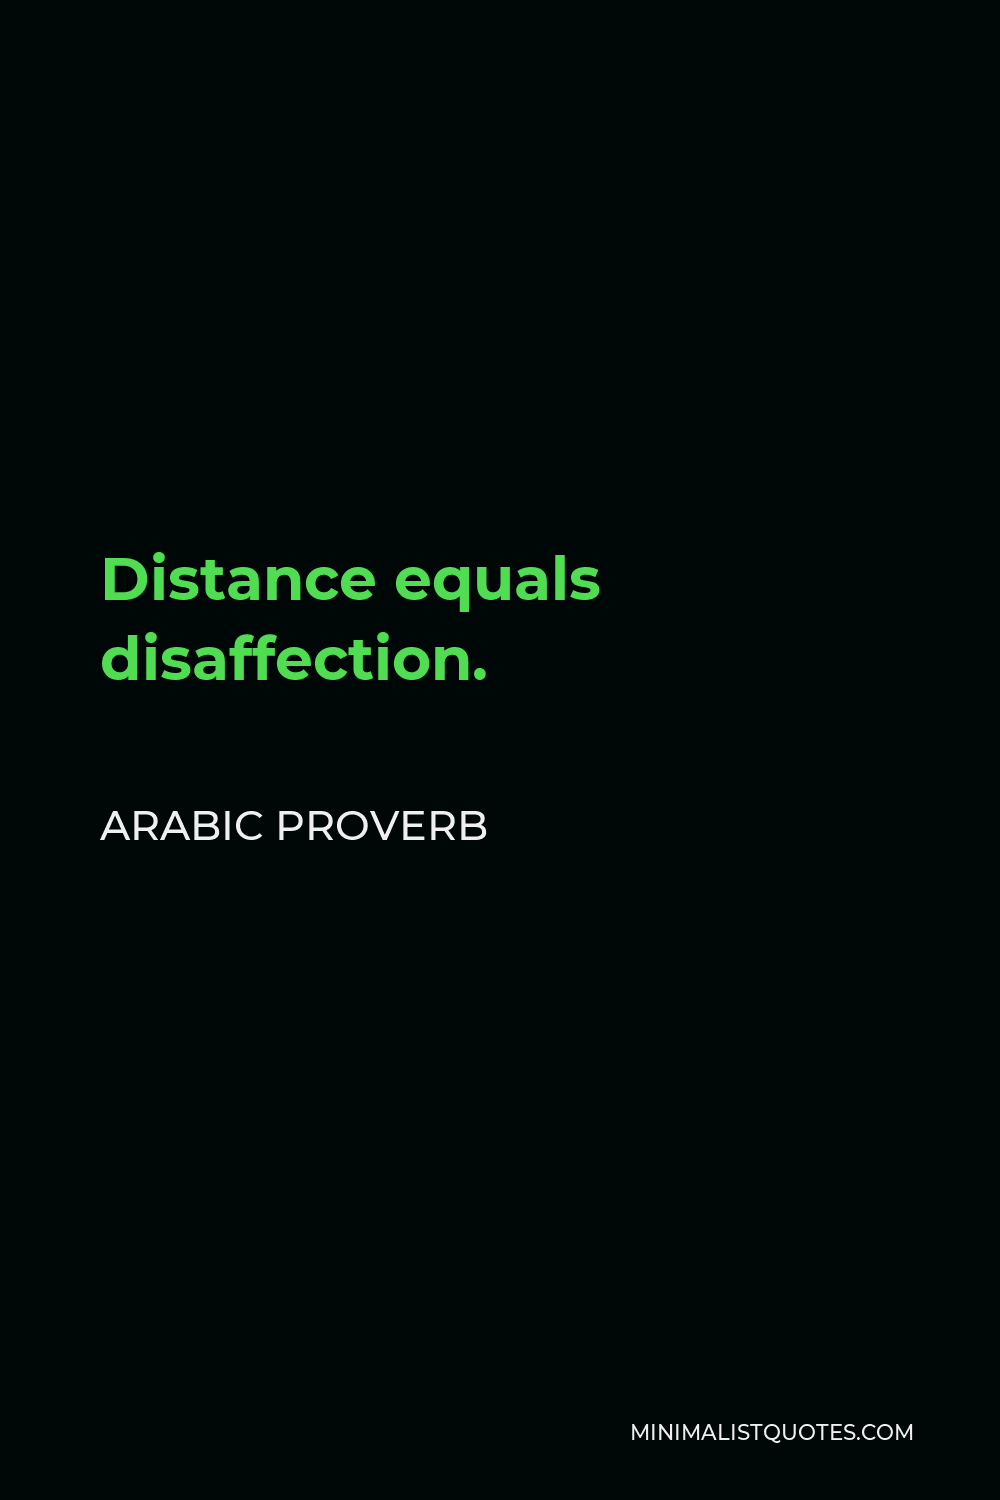 Arabic Proverb Quote - Distance equals disaffection.